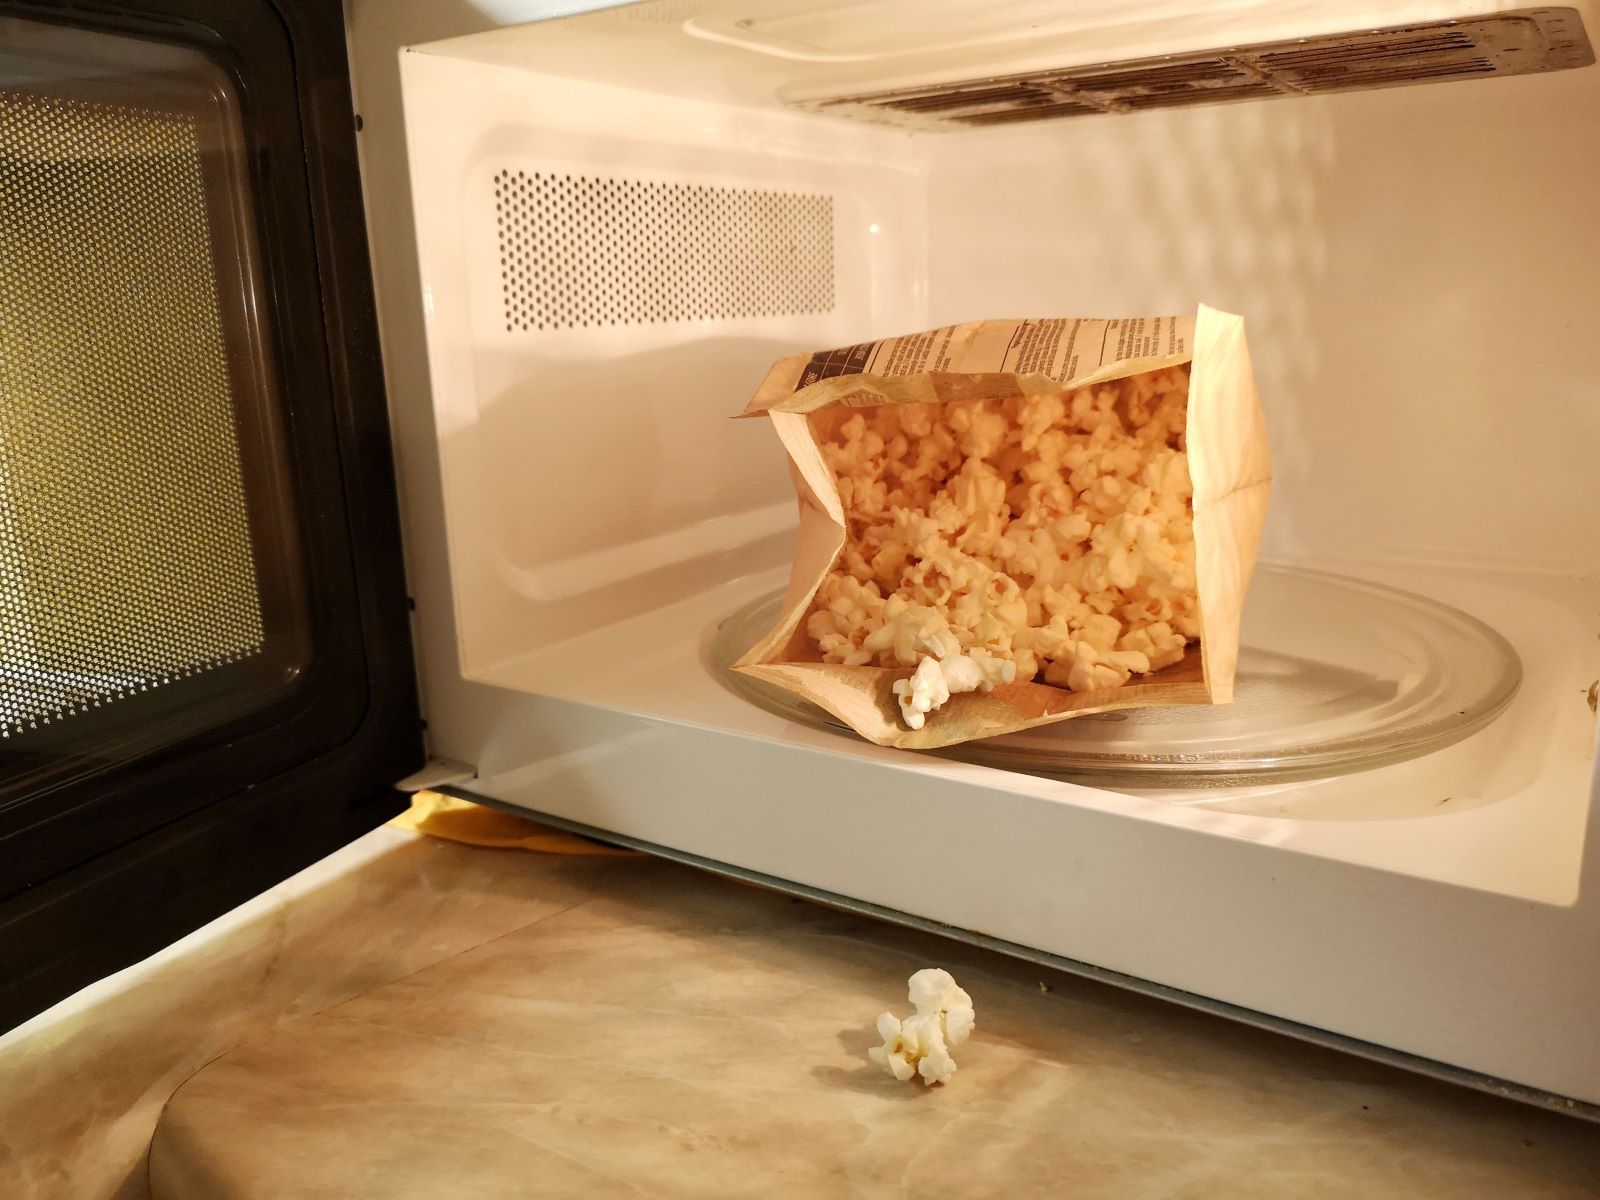 20-microwave-popcorn-nutrition-facts